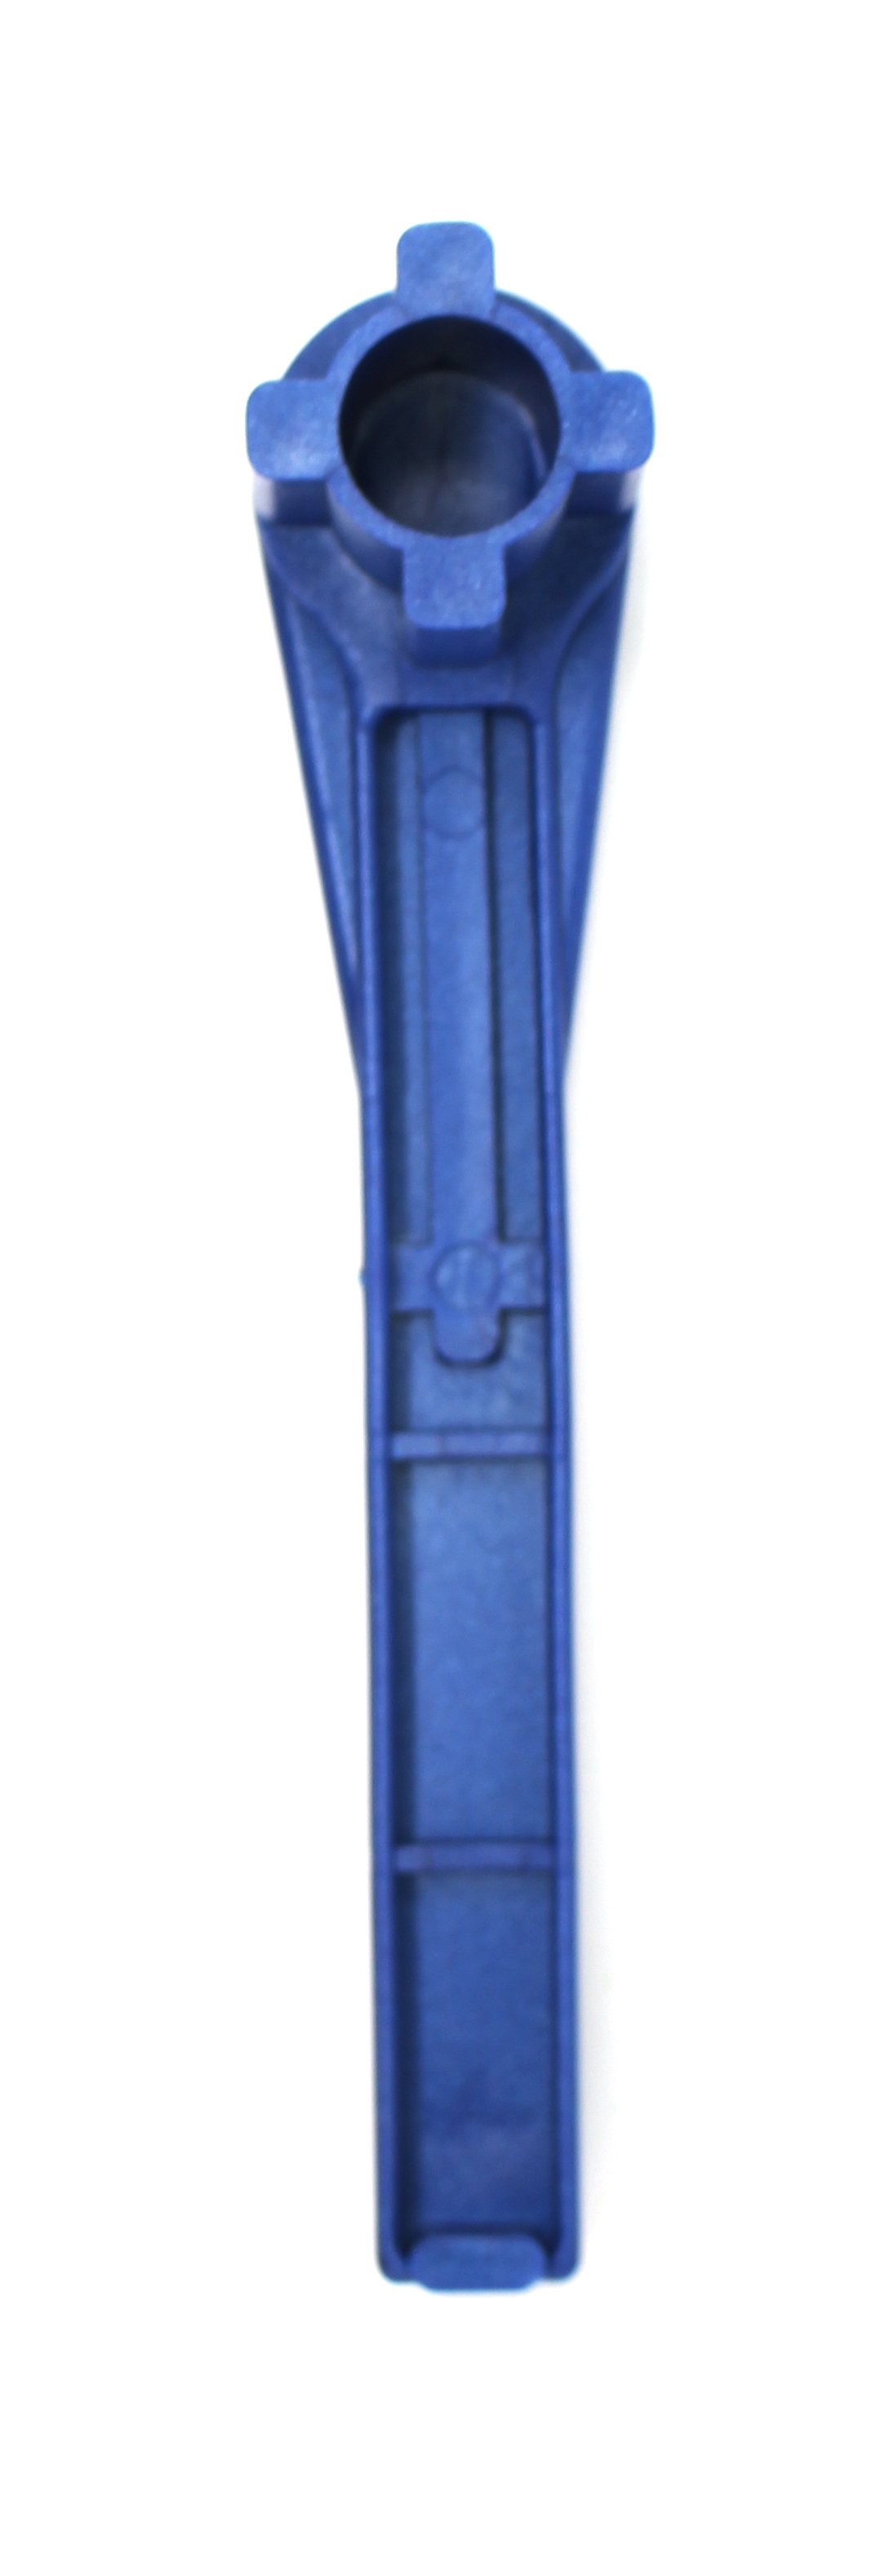 Gas and Bung Wrench Non Sparking Solid Drum Bung Nut Wrench (BLUE) - image 1 of 9